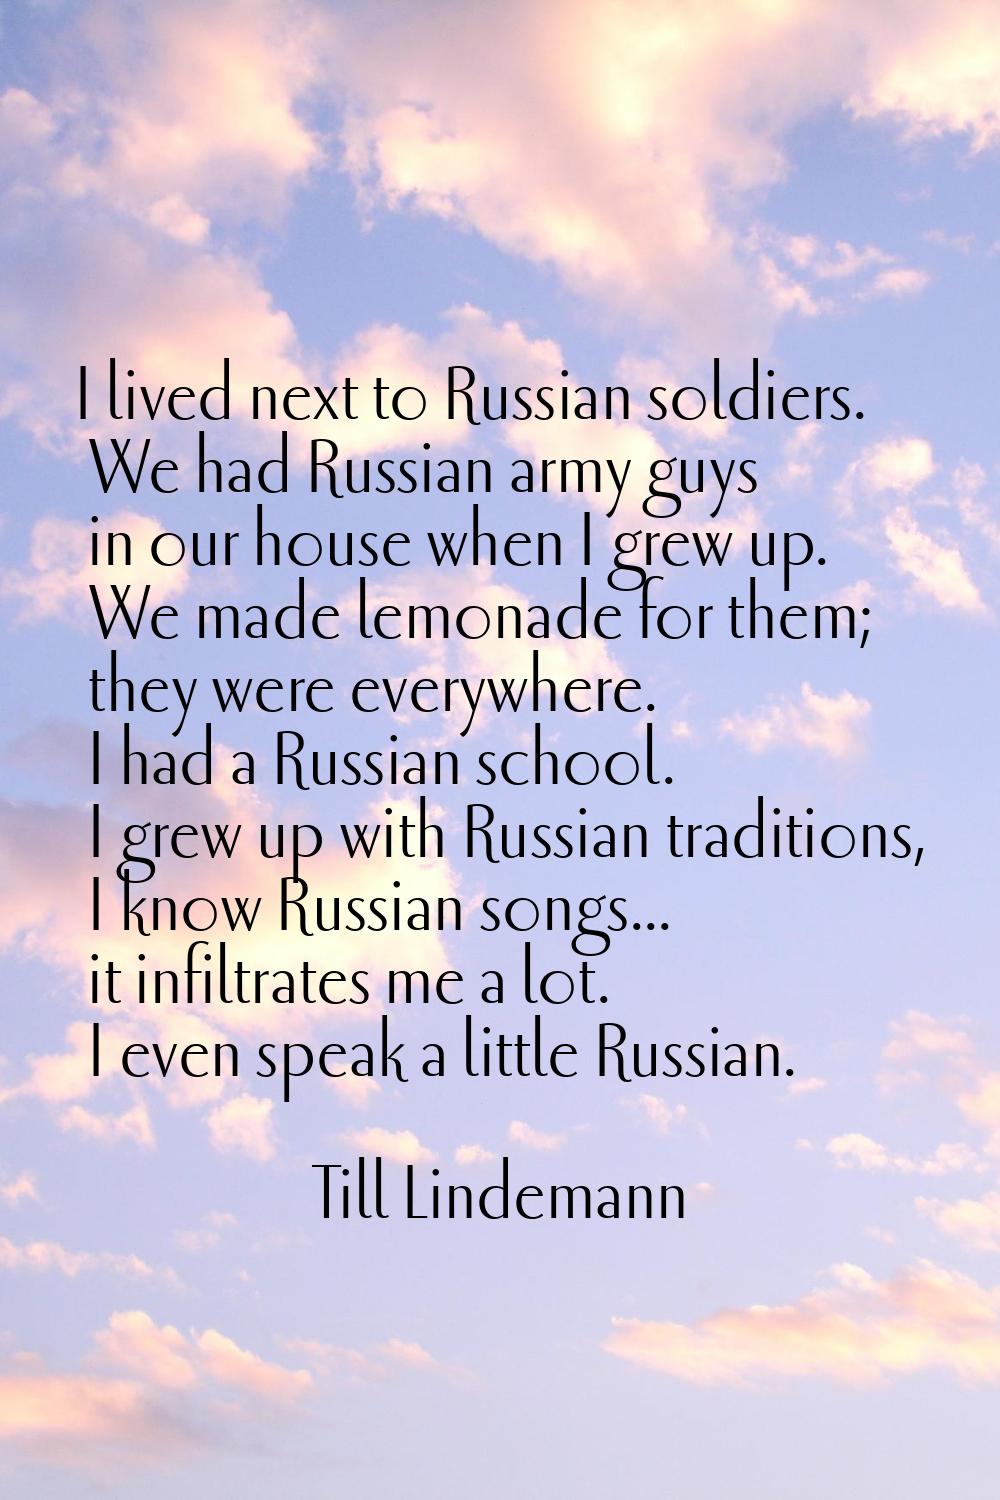 I lived next to Russian soldiers. We had Russian army guys in our house when I grew up. We made lem